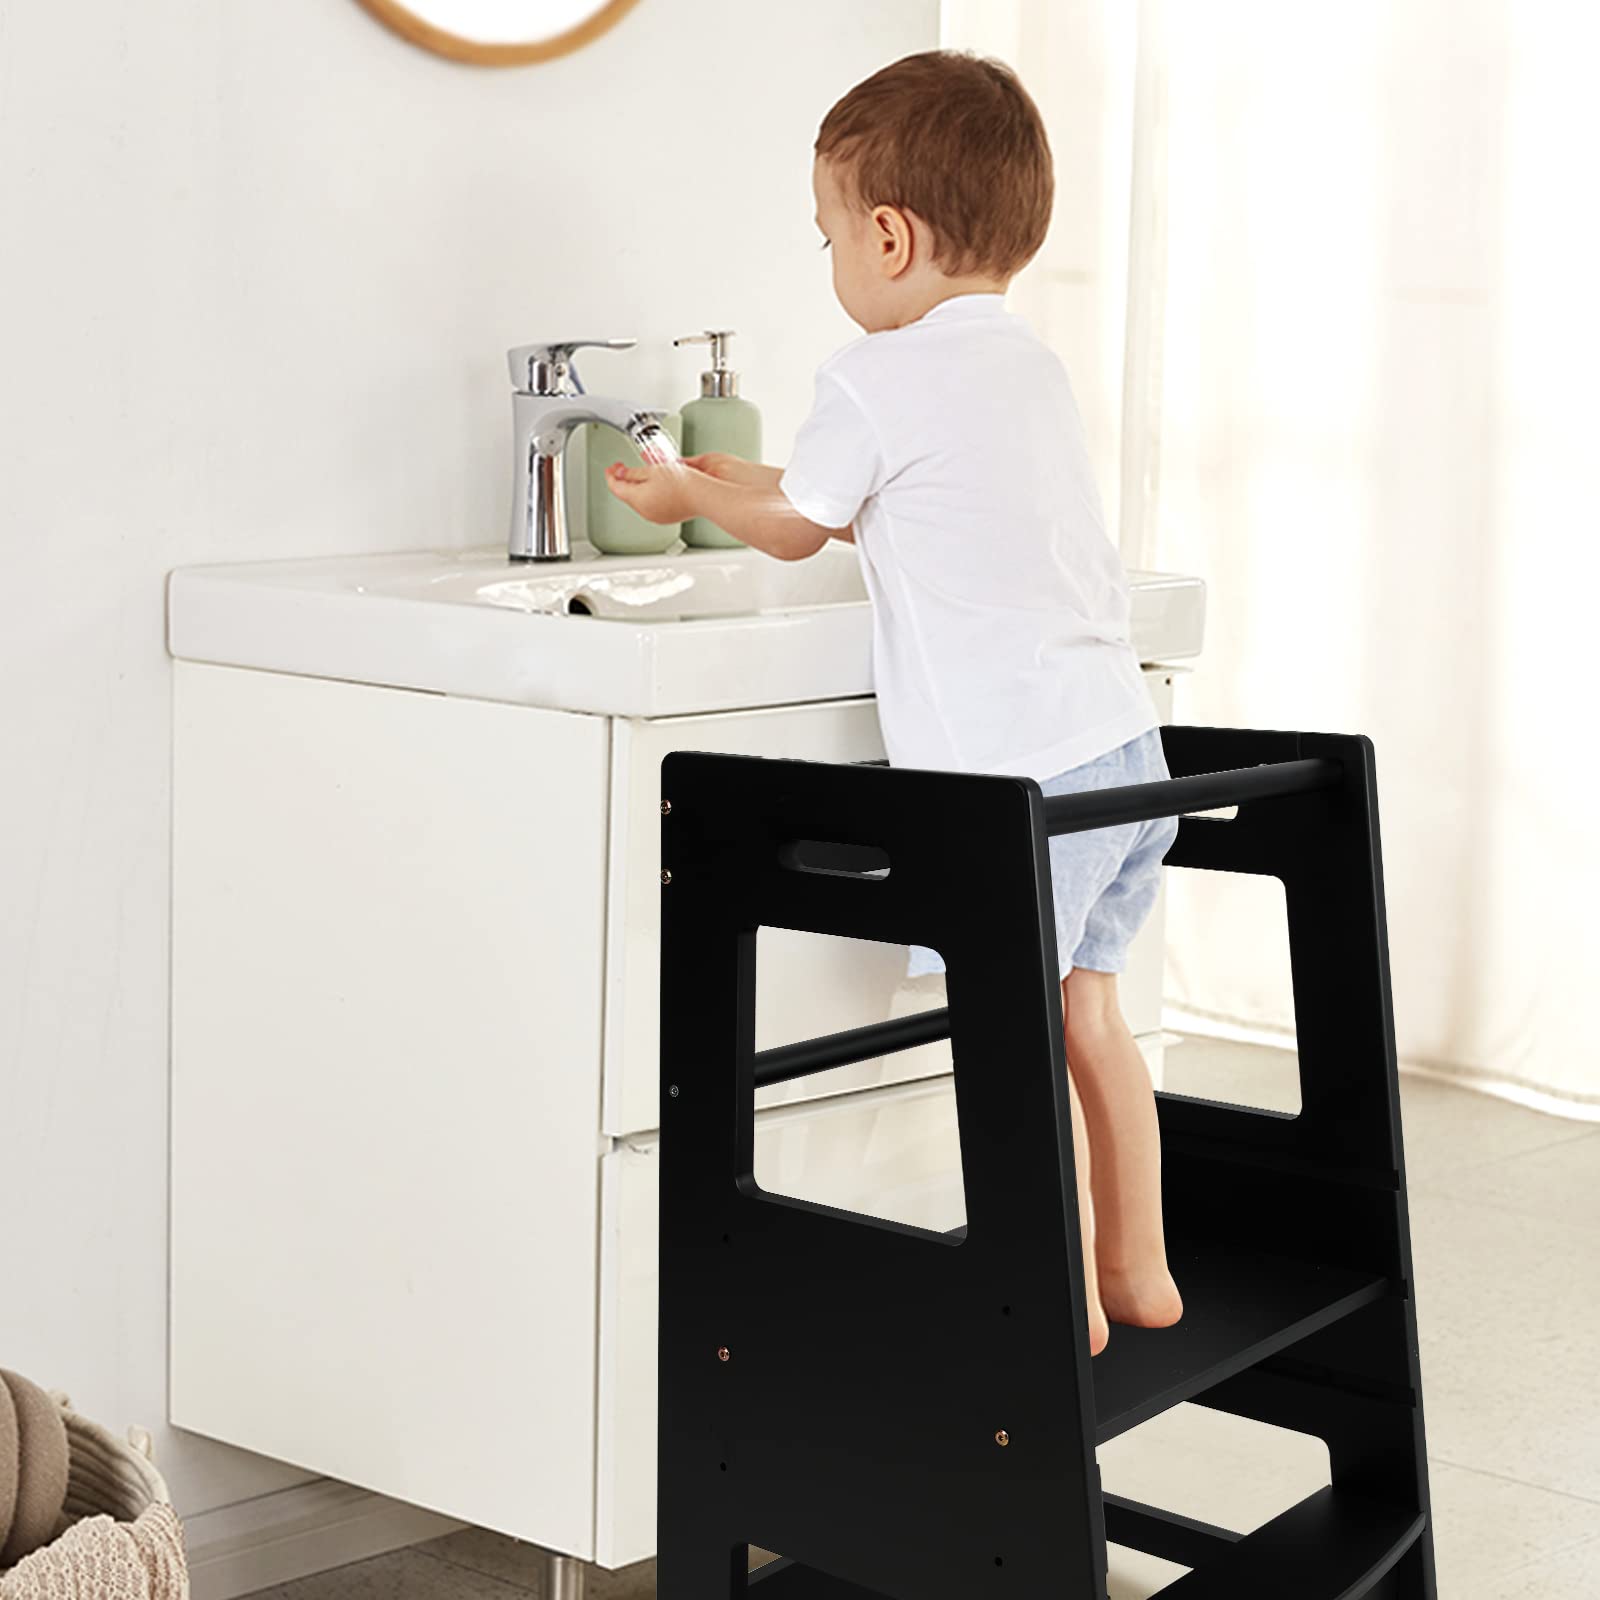 ECOMEX Toddler Standing Tower Kitchen Step Stool for Kid's Adjustable Height Learning Stool Helper Removable Anti-Drop Safety Rail Stool for Bedroom, Bathroom, Black